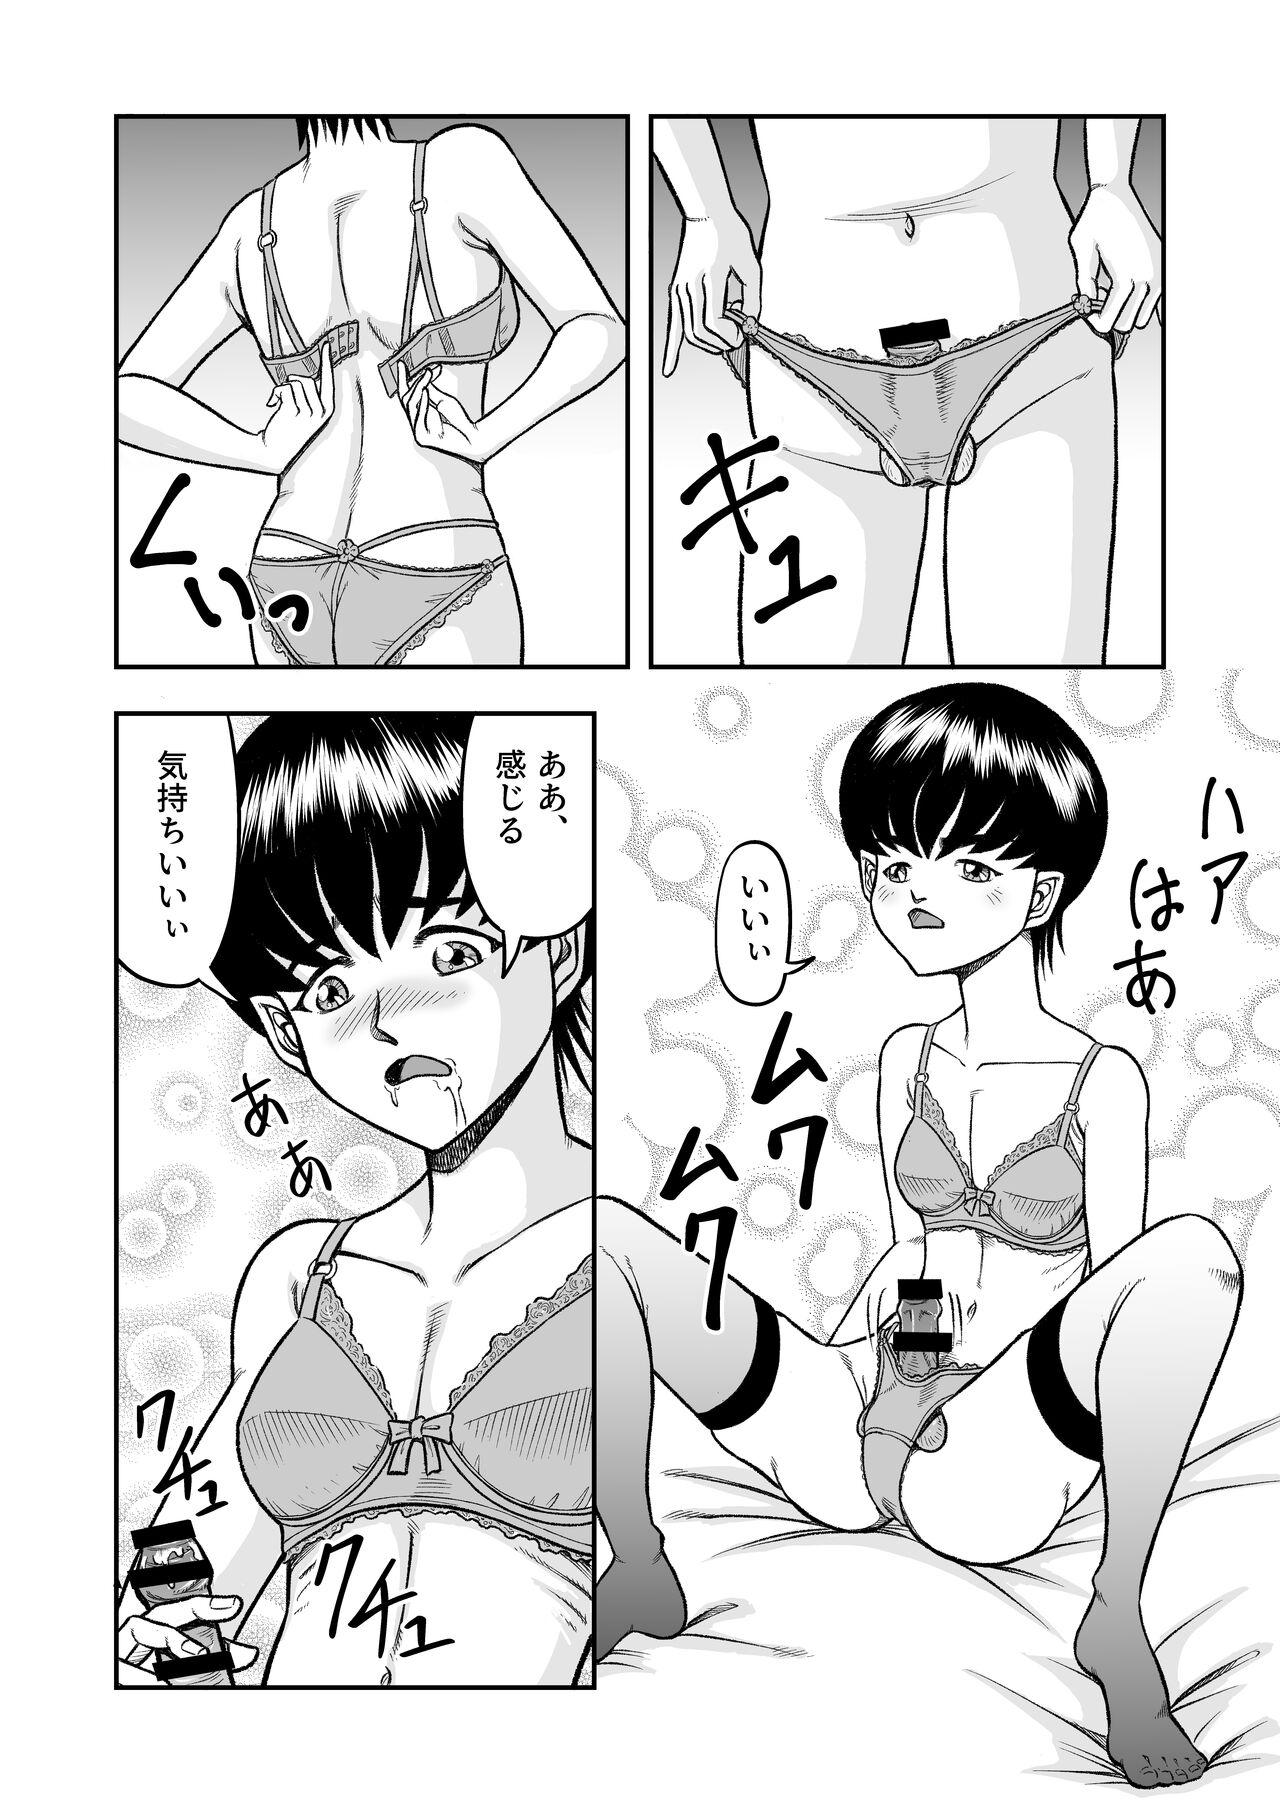 Lingerie OwnWillボクがアタシになったとき 総集編 - Original Stepfamily - Page 6